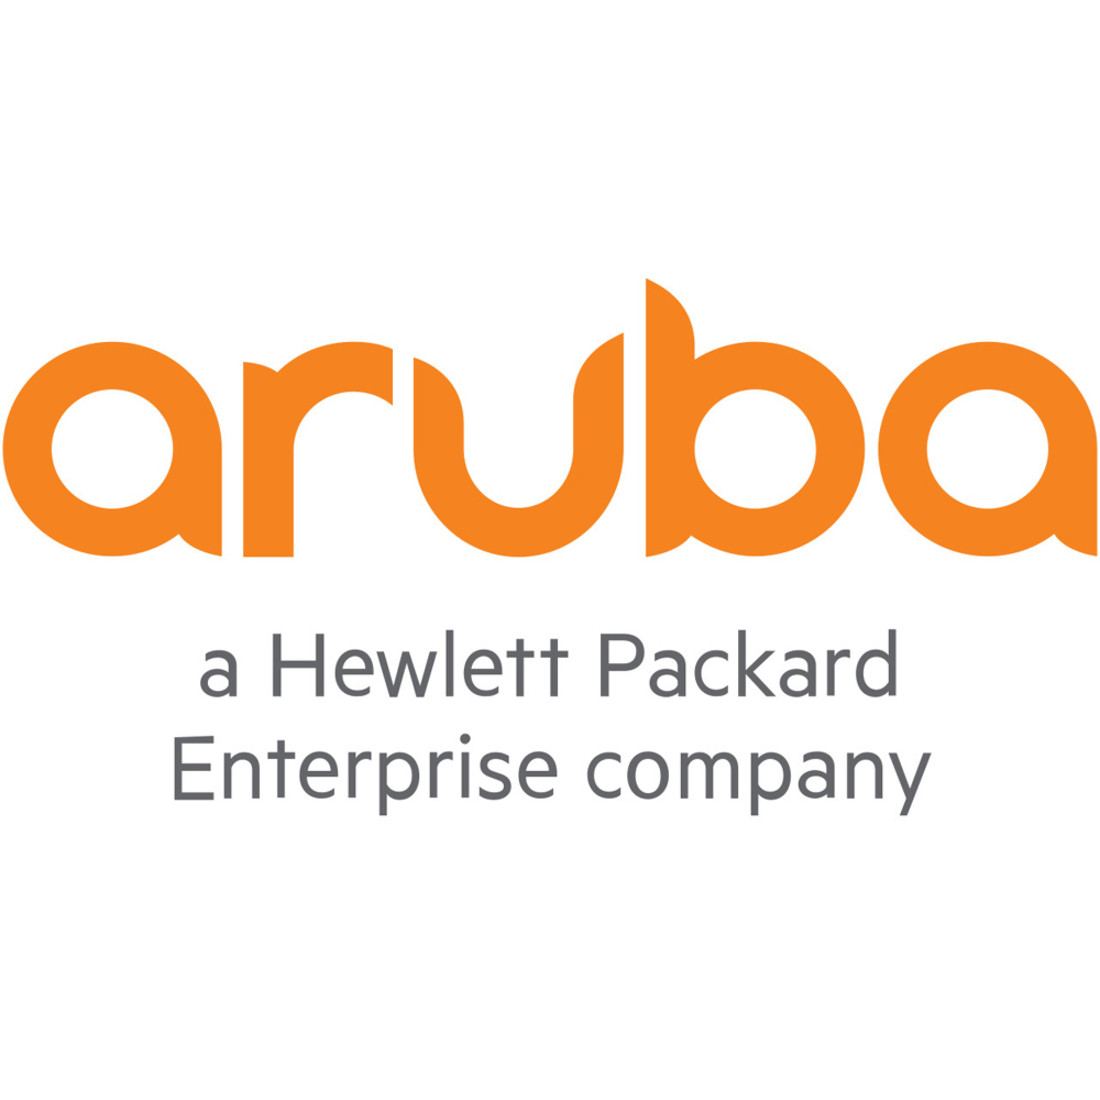 Aruba ClearPass New Licensing OnGuardSubscription License500 EndpointElectronic JZ500AAE